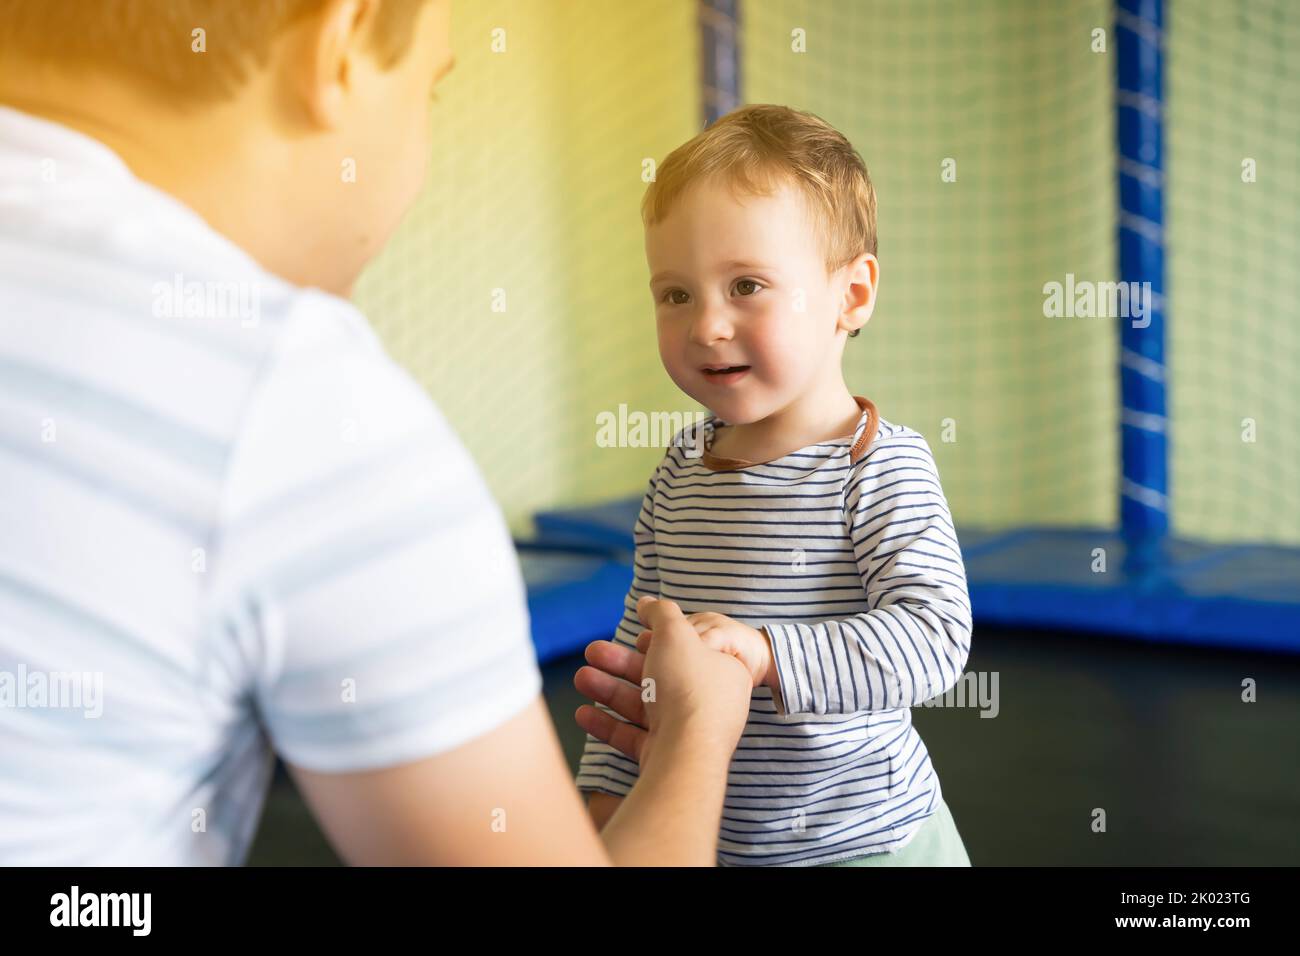 Dad holds the hand of a boy jumping on a trampoline. Family time. Boy of one and a half years. Active entertainment. Toddler. Focus on the boy's eyes Stock Photo